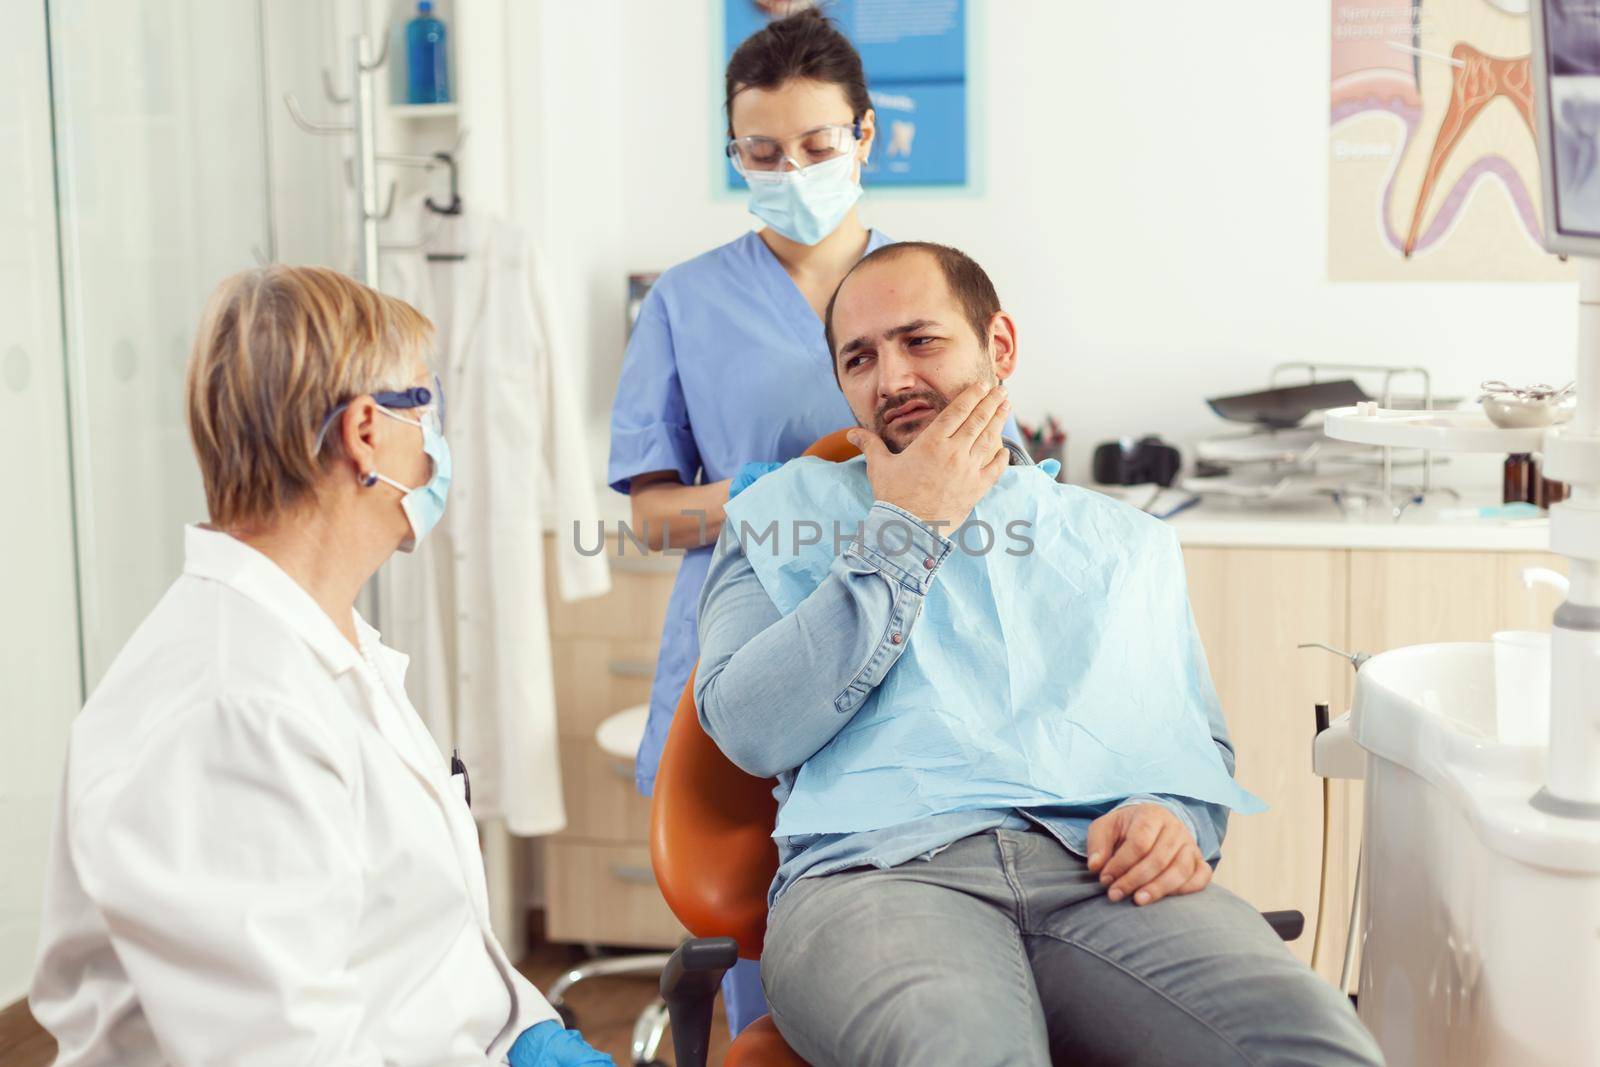 Stomatologist doctor talking to man patient with toothache sitting on dental chair preparing for medical examination. Dentists team working in stomatology hospital clinic office